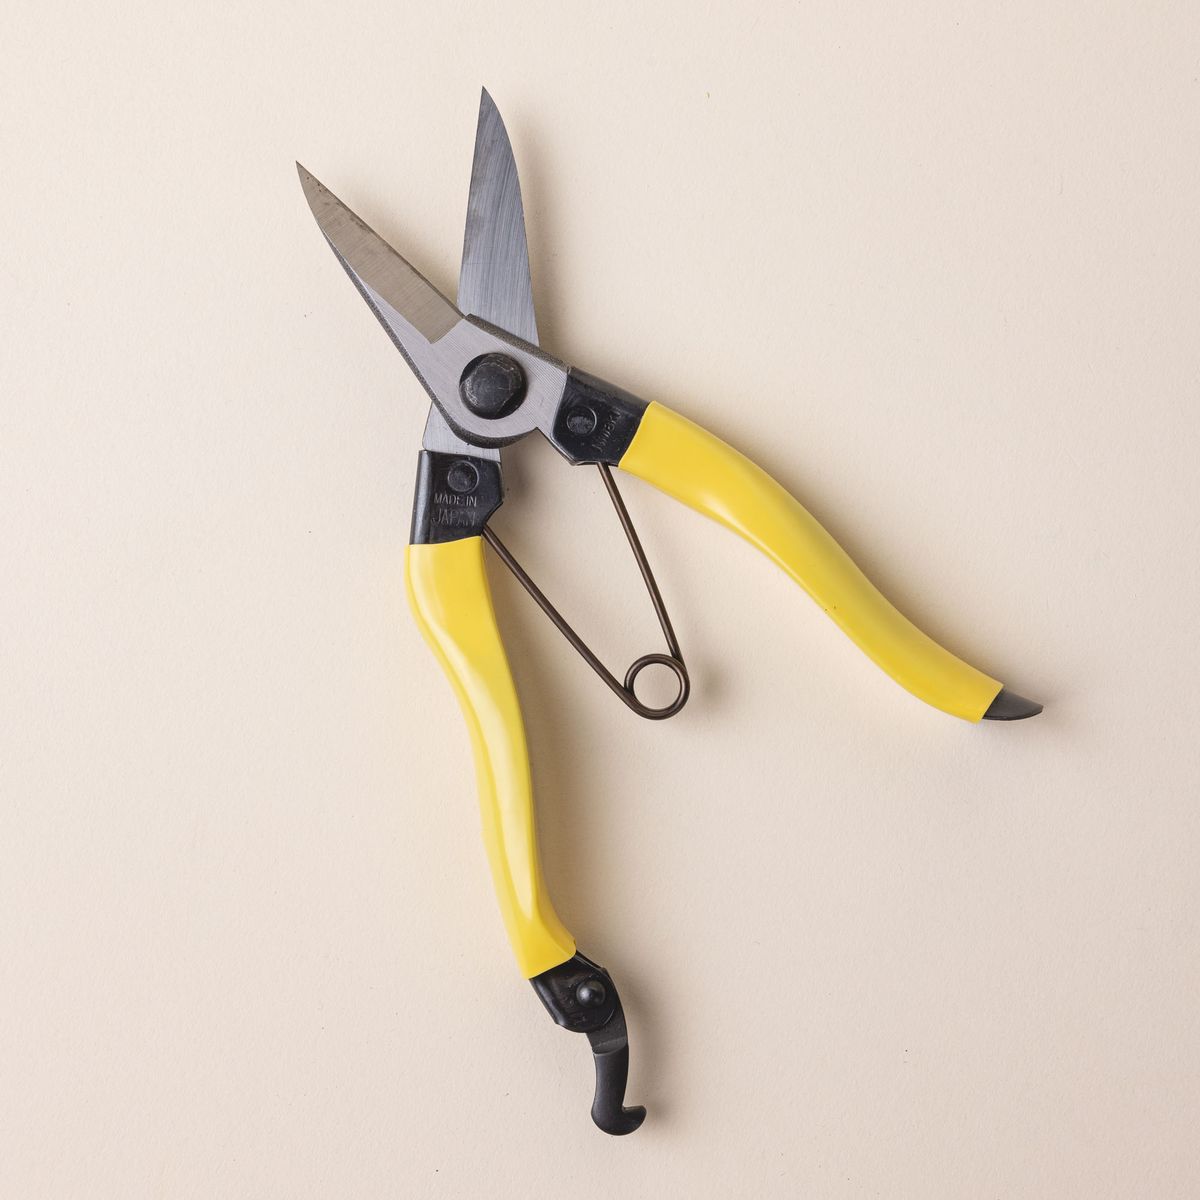 A pair of garden snips with a yellow handle and wide short blades